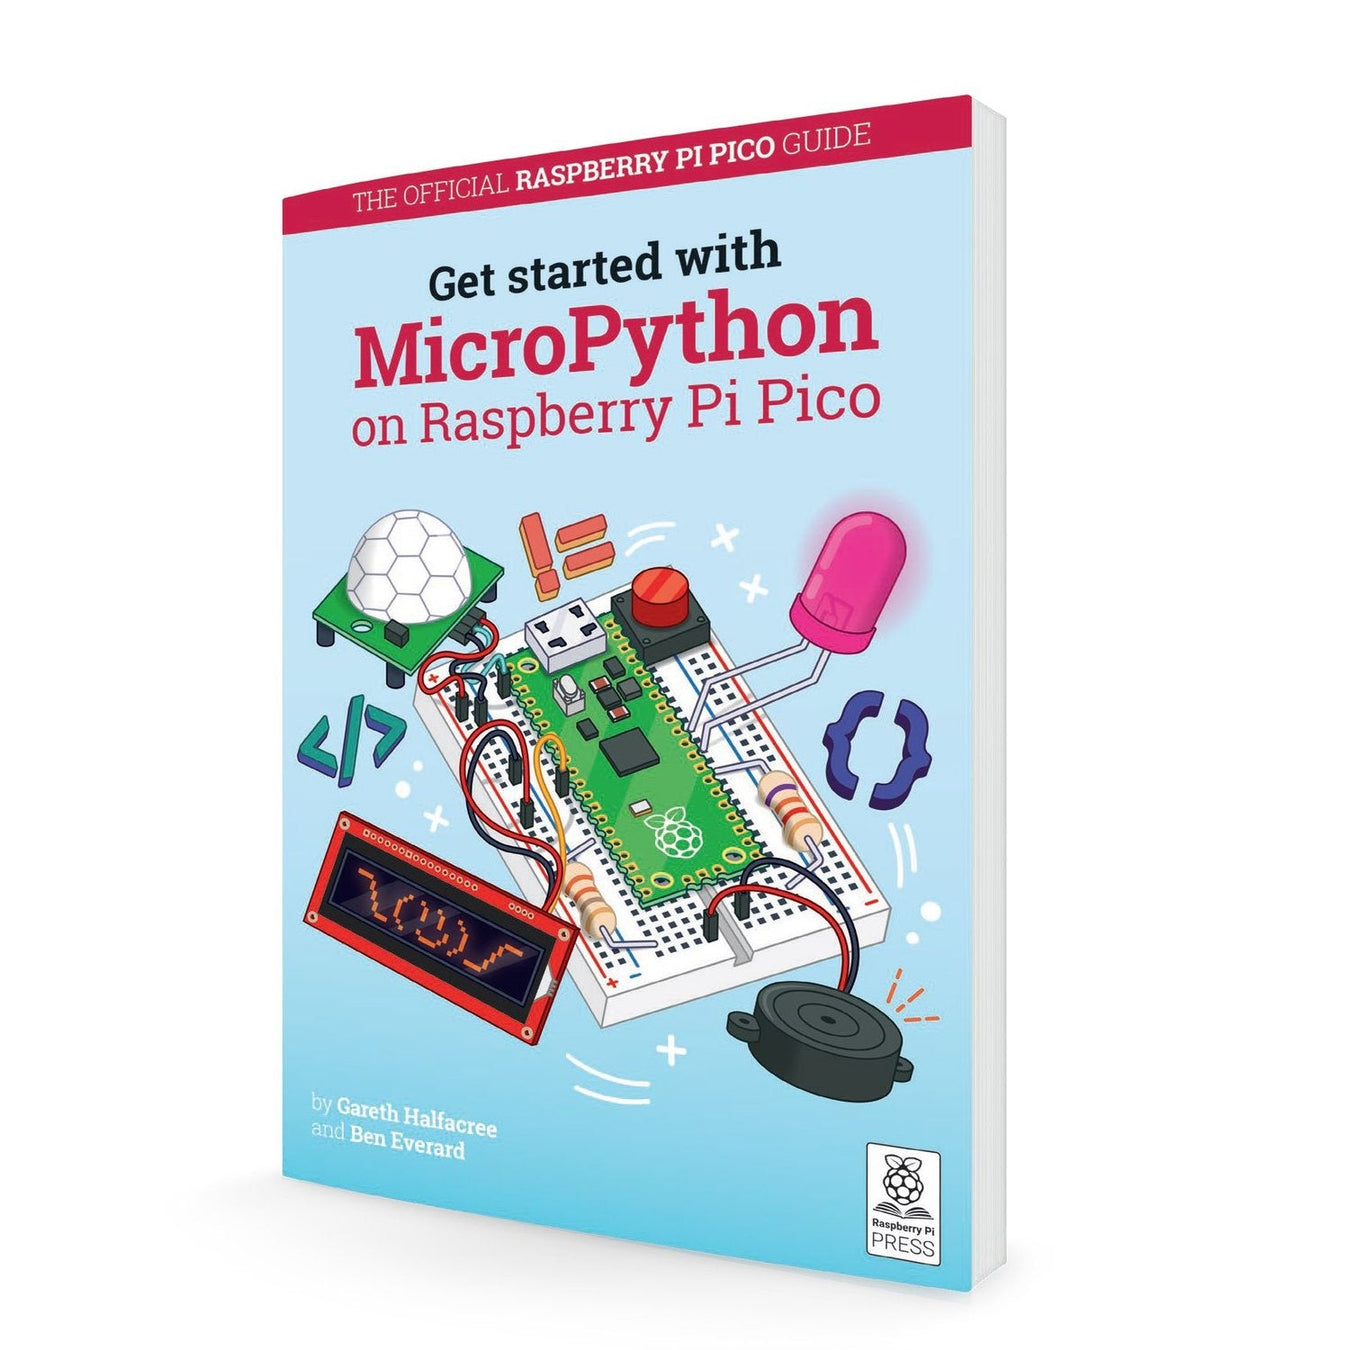 Raspberry Pi Pico Books and Learning Resources